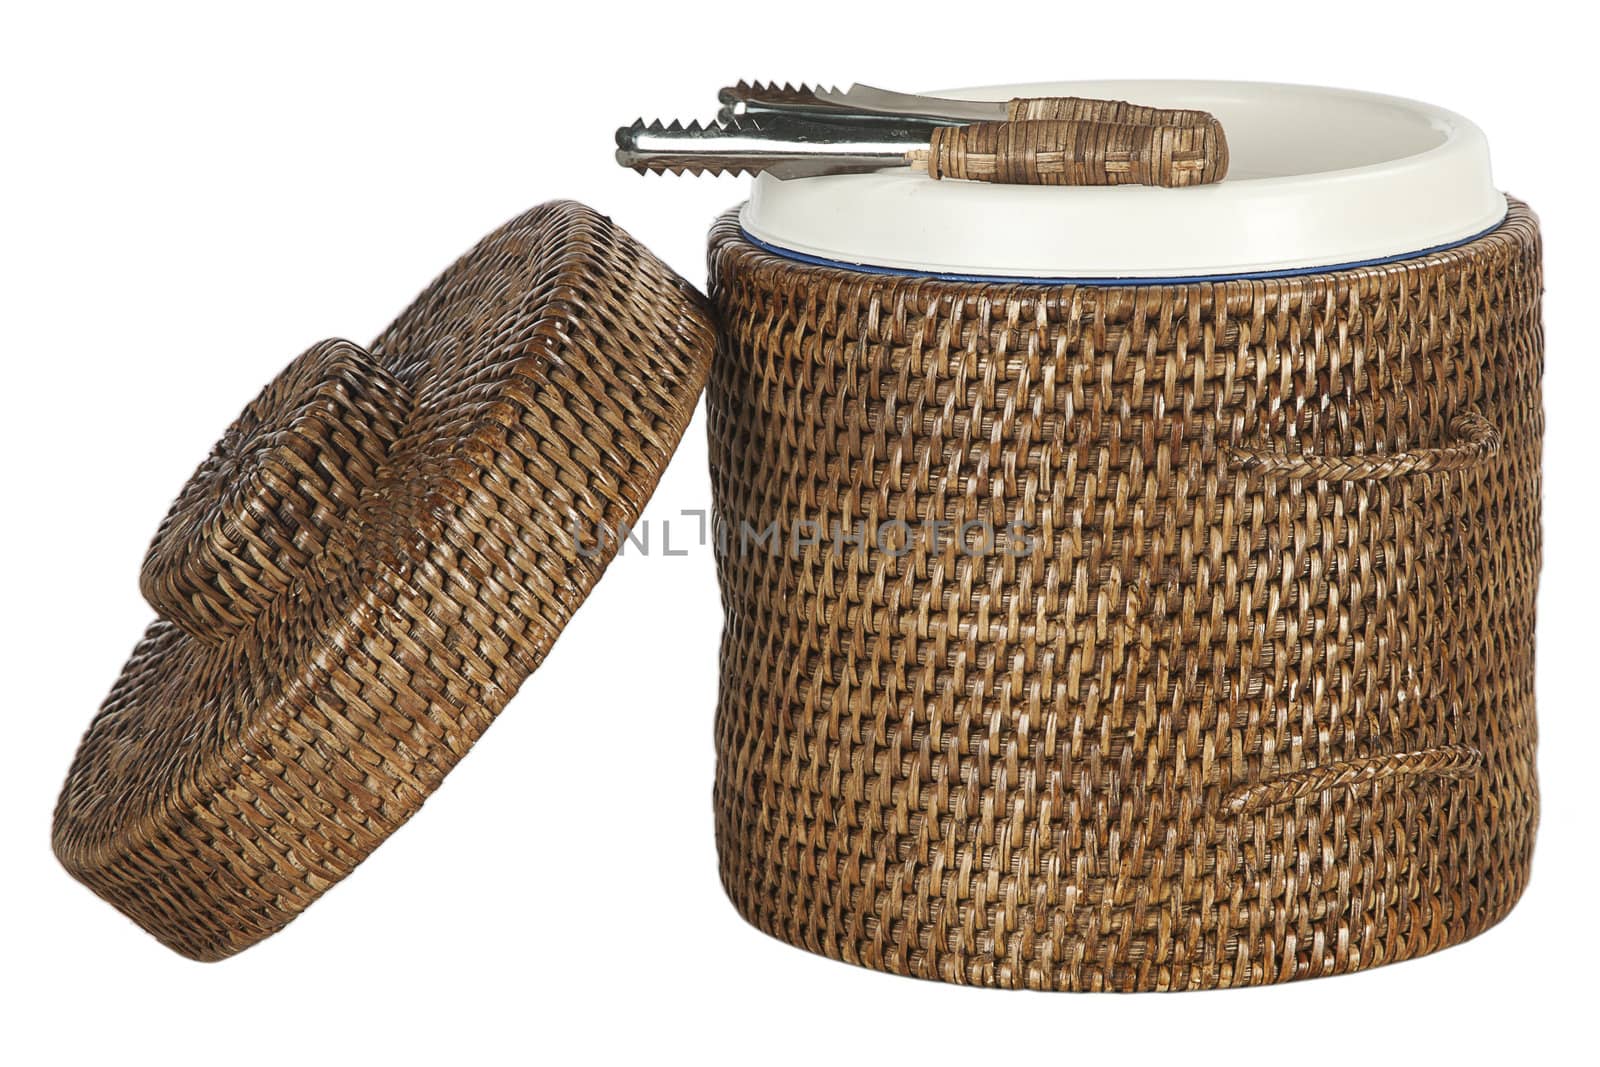 ice bucket covered in bamboo, isolated on white background